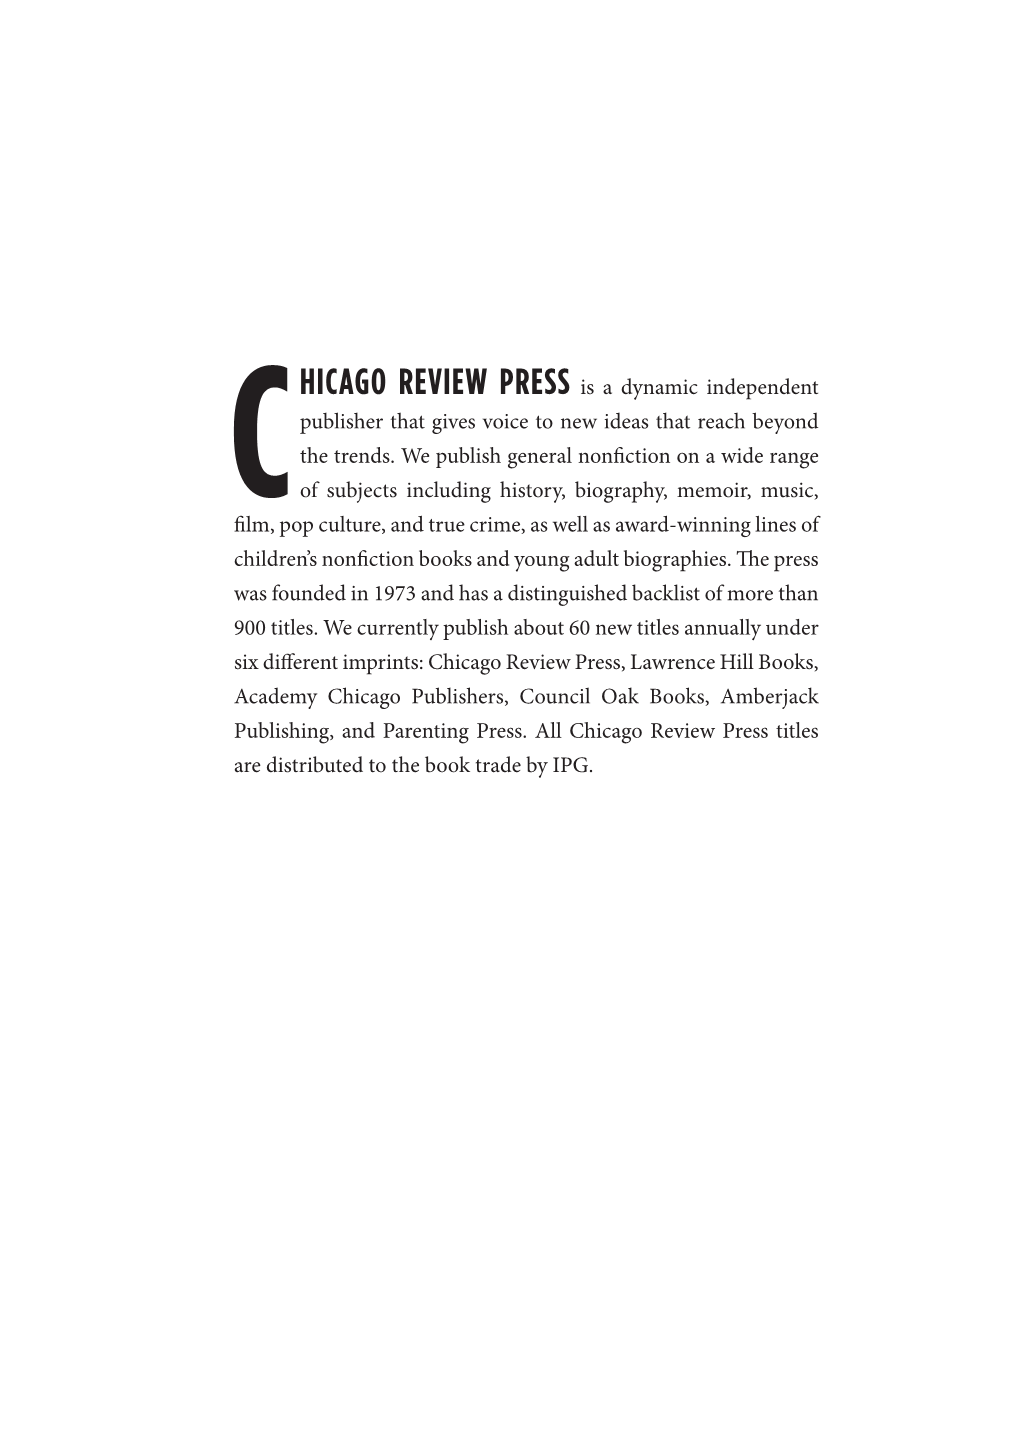 CHICAGO REVIEW PRESS Is a Dynamic Independent Publisher That